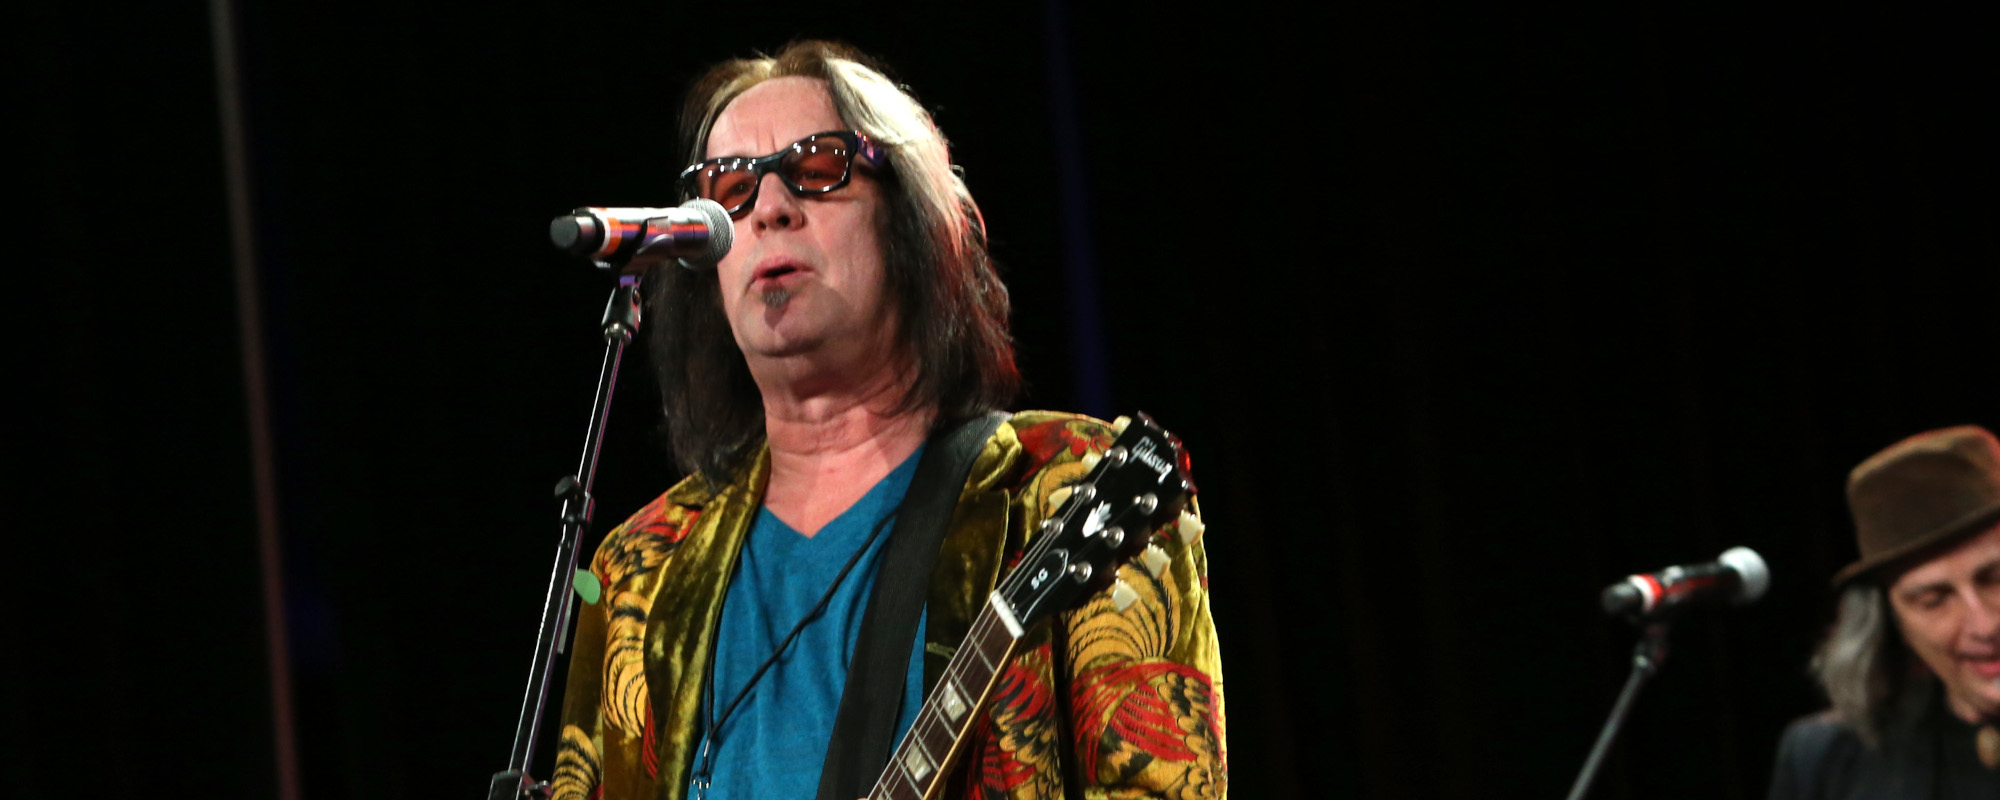 The Meaning Behind “Hello It’s Me” by Todd Rundgren and the Delicate ’60s Ballads that Inspired It